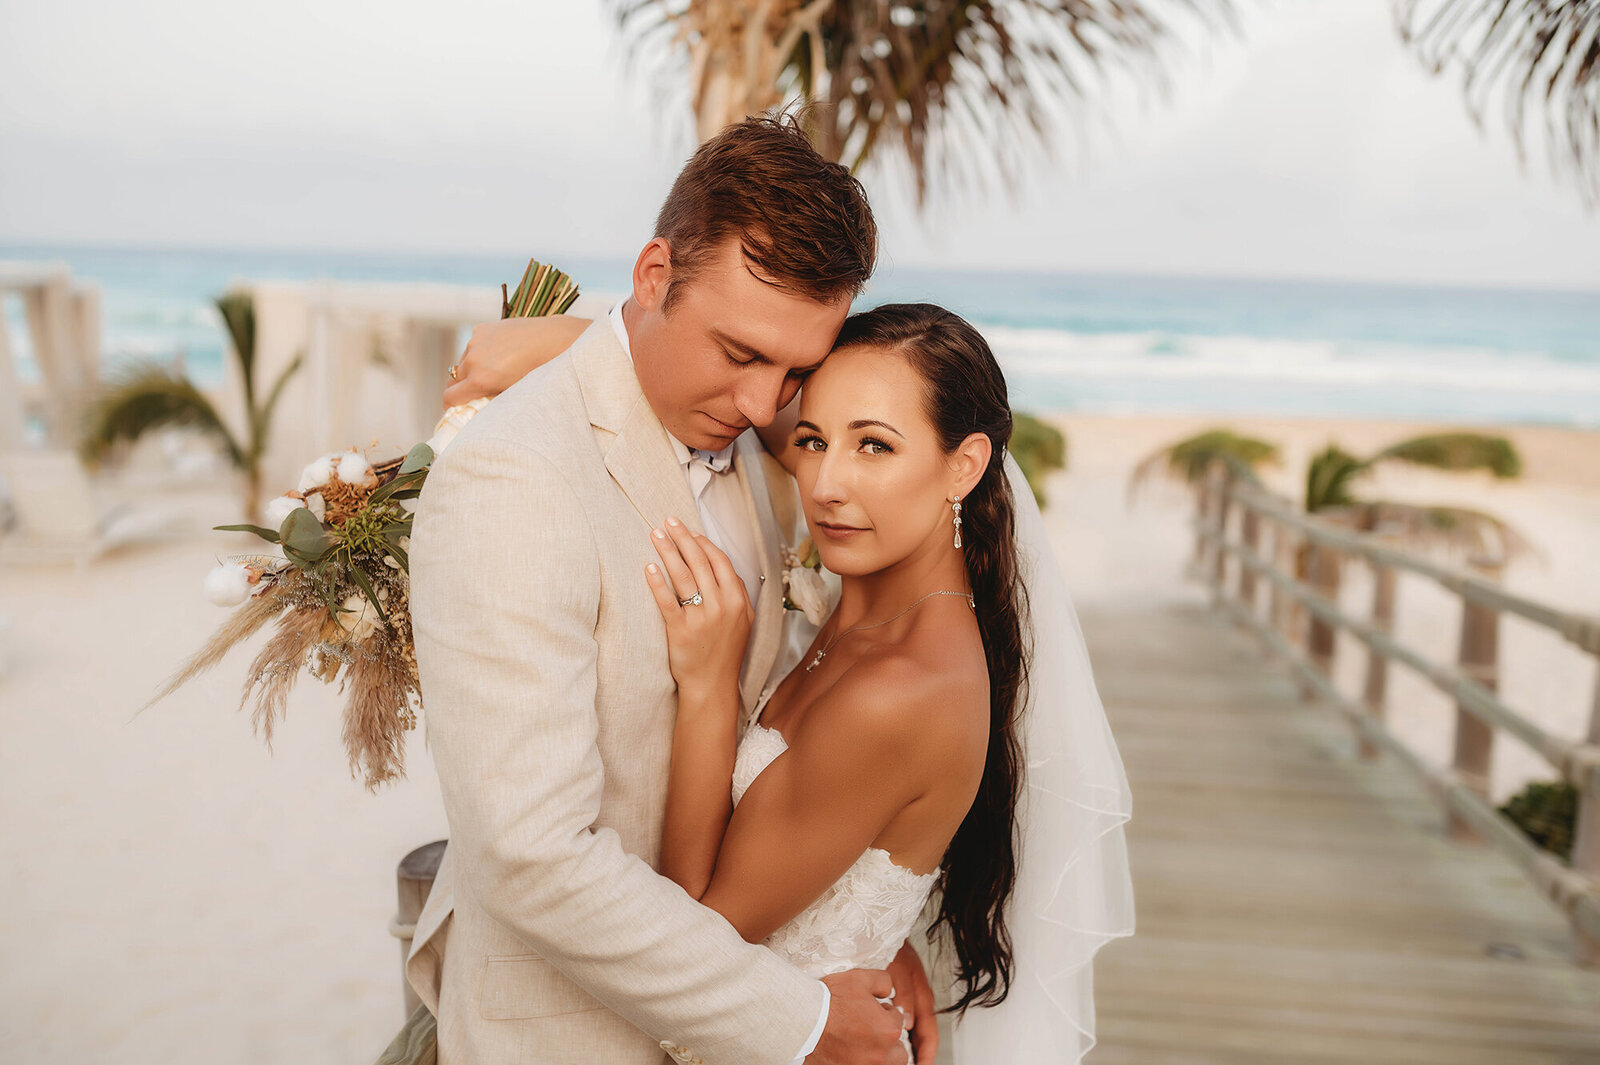 Newlyweds embrace for portraits after their Elopement Ceremony at Live Aqua Resort in Cancun, Mexico.